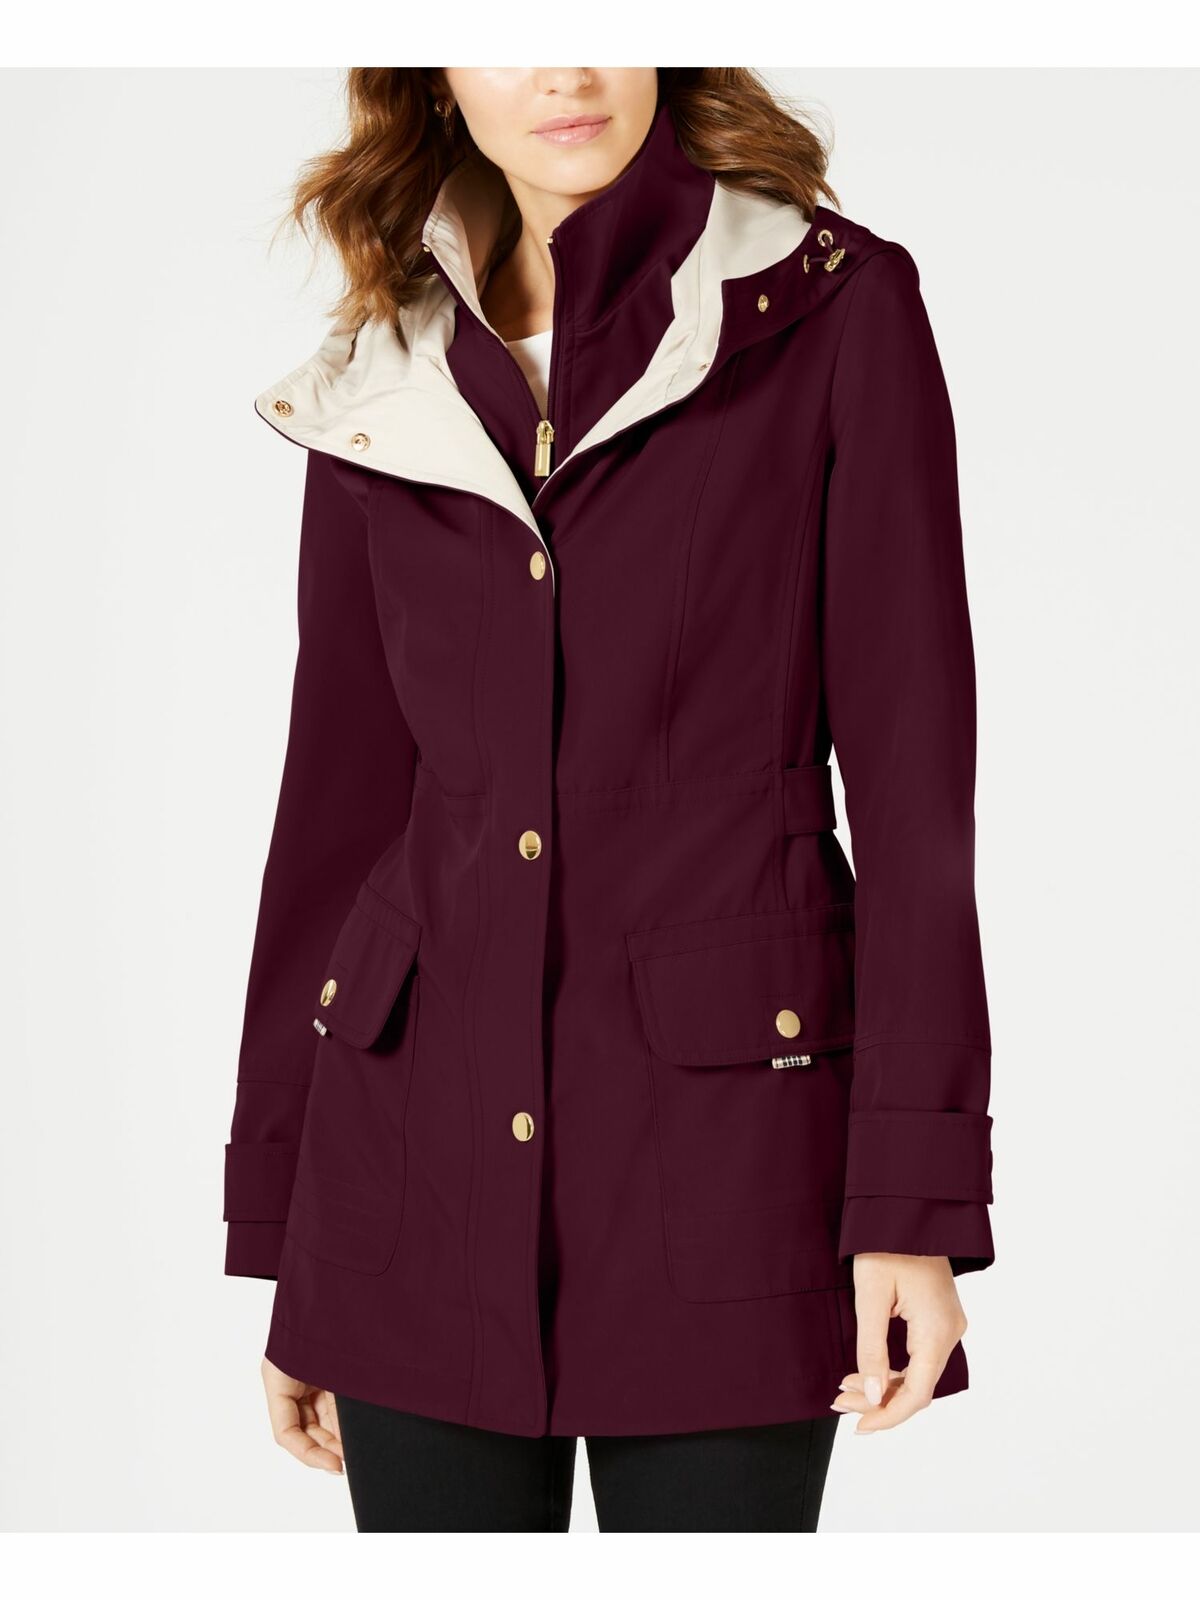 JONES NY Womens Maroon Pocketed Hooded Buttoned Raincoat  Size L